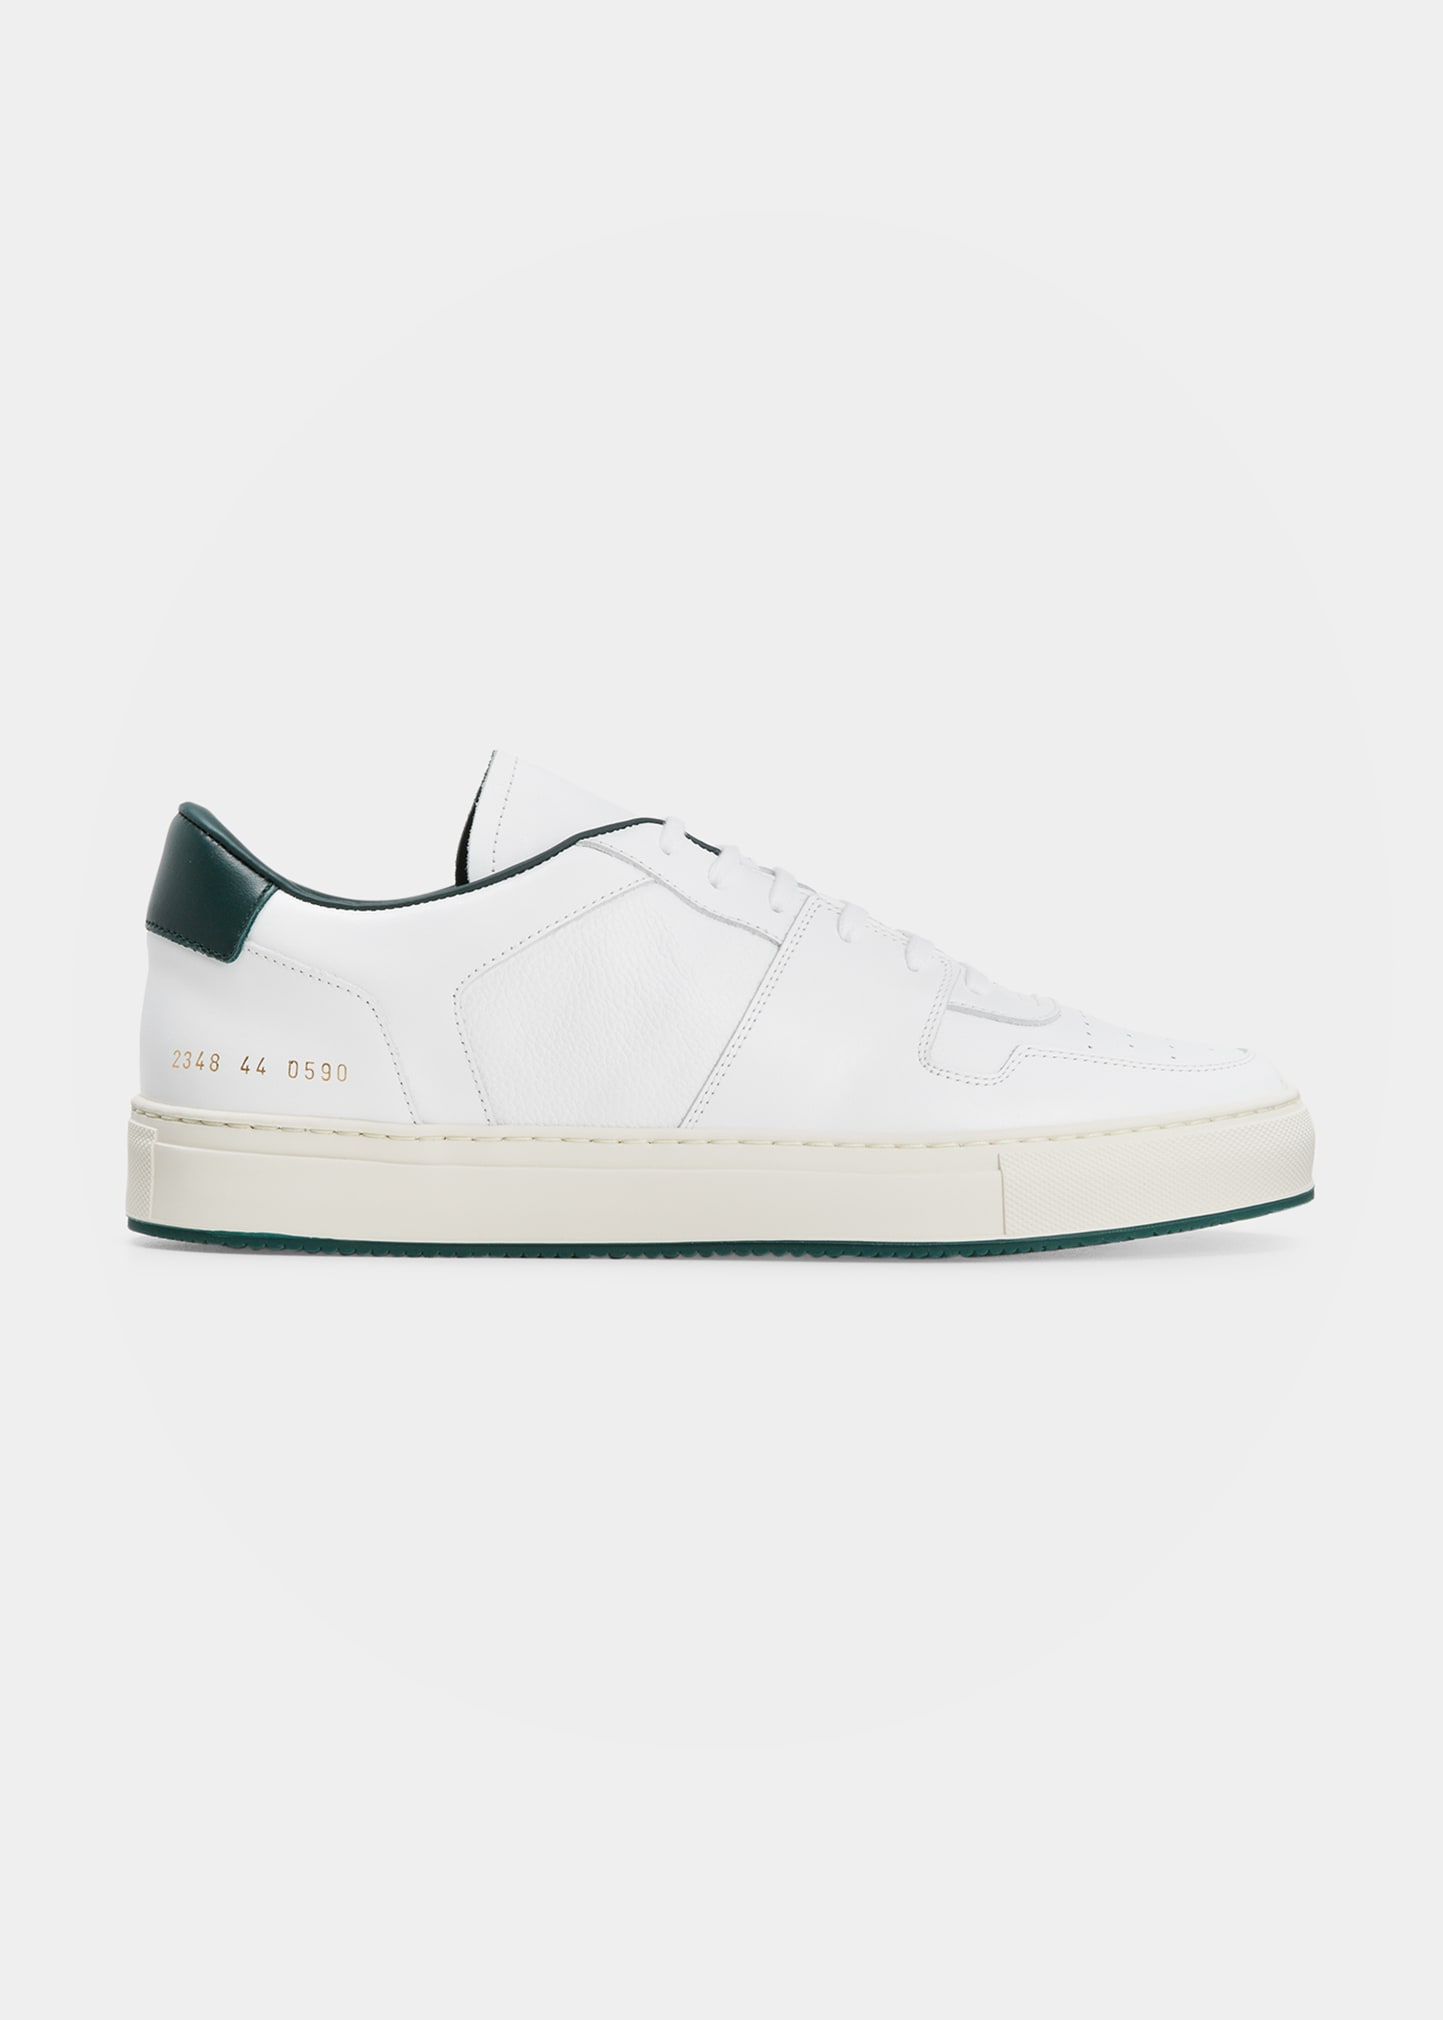 Common Projects Men's Decades Mixed Leather Low-Top Sneakers